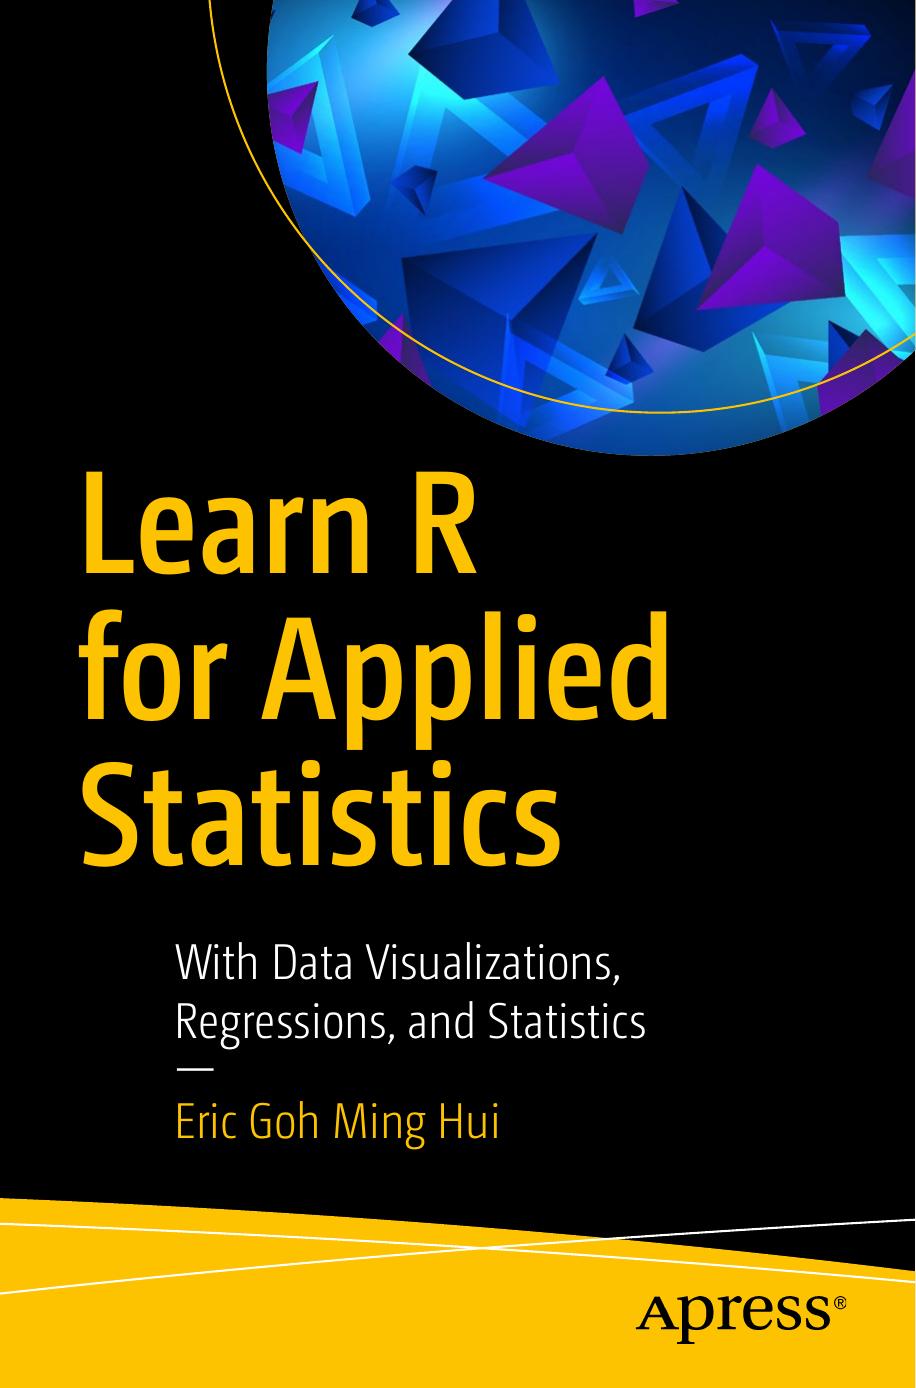 Learn R for Applied Statistics  With Data Visualizations, Regressions, and Statistics 2019